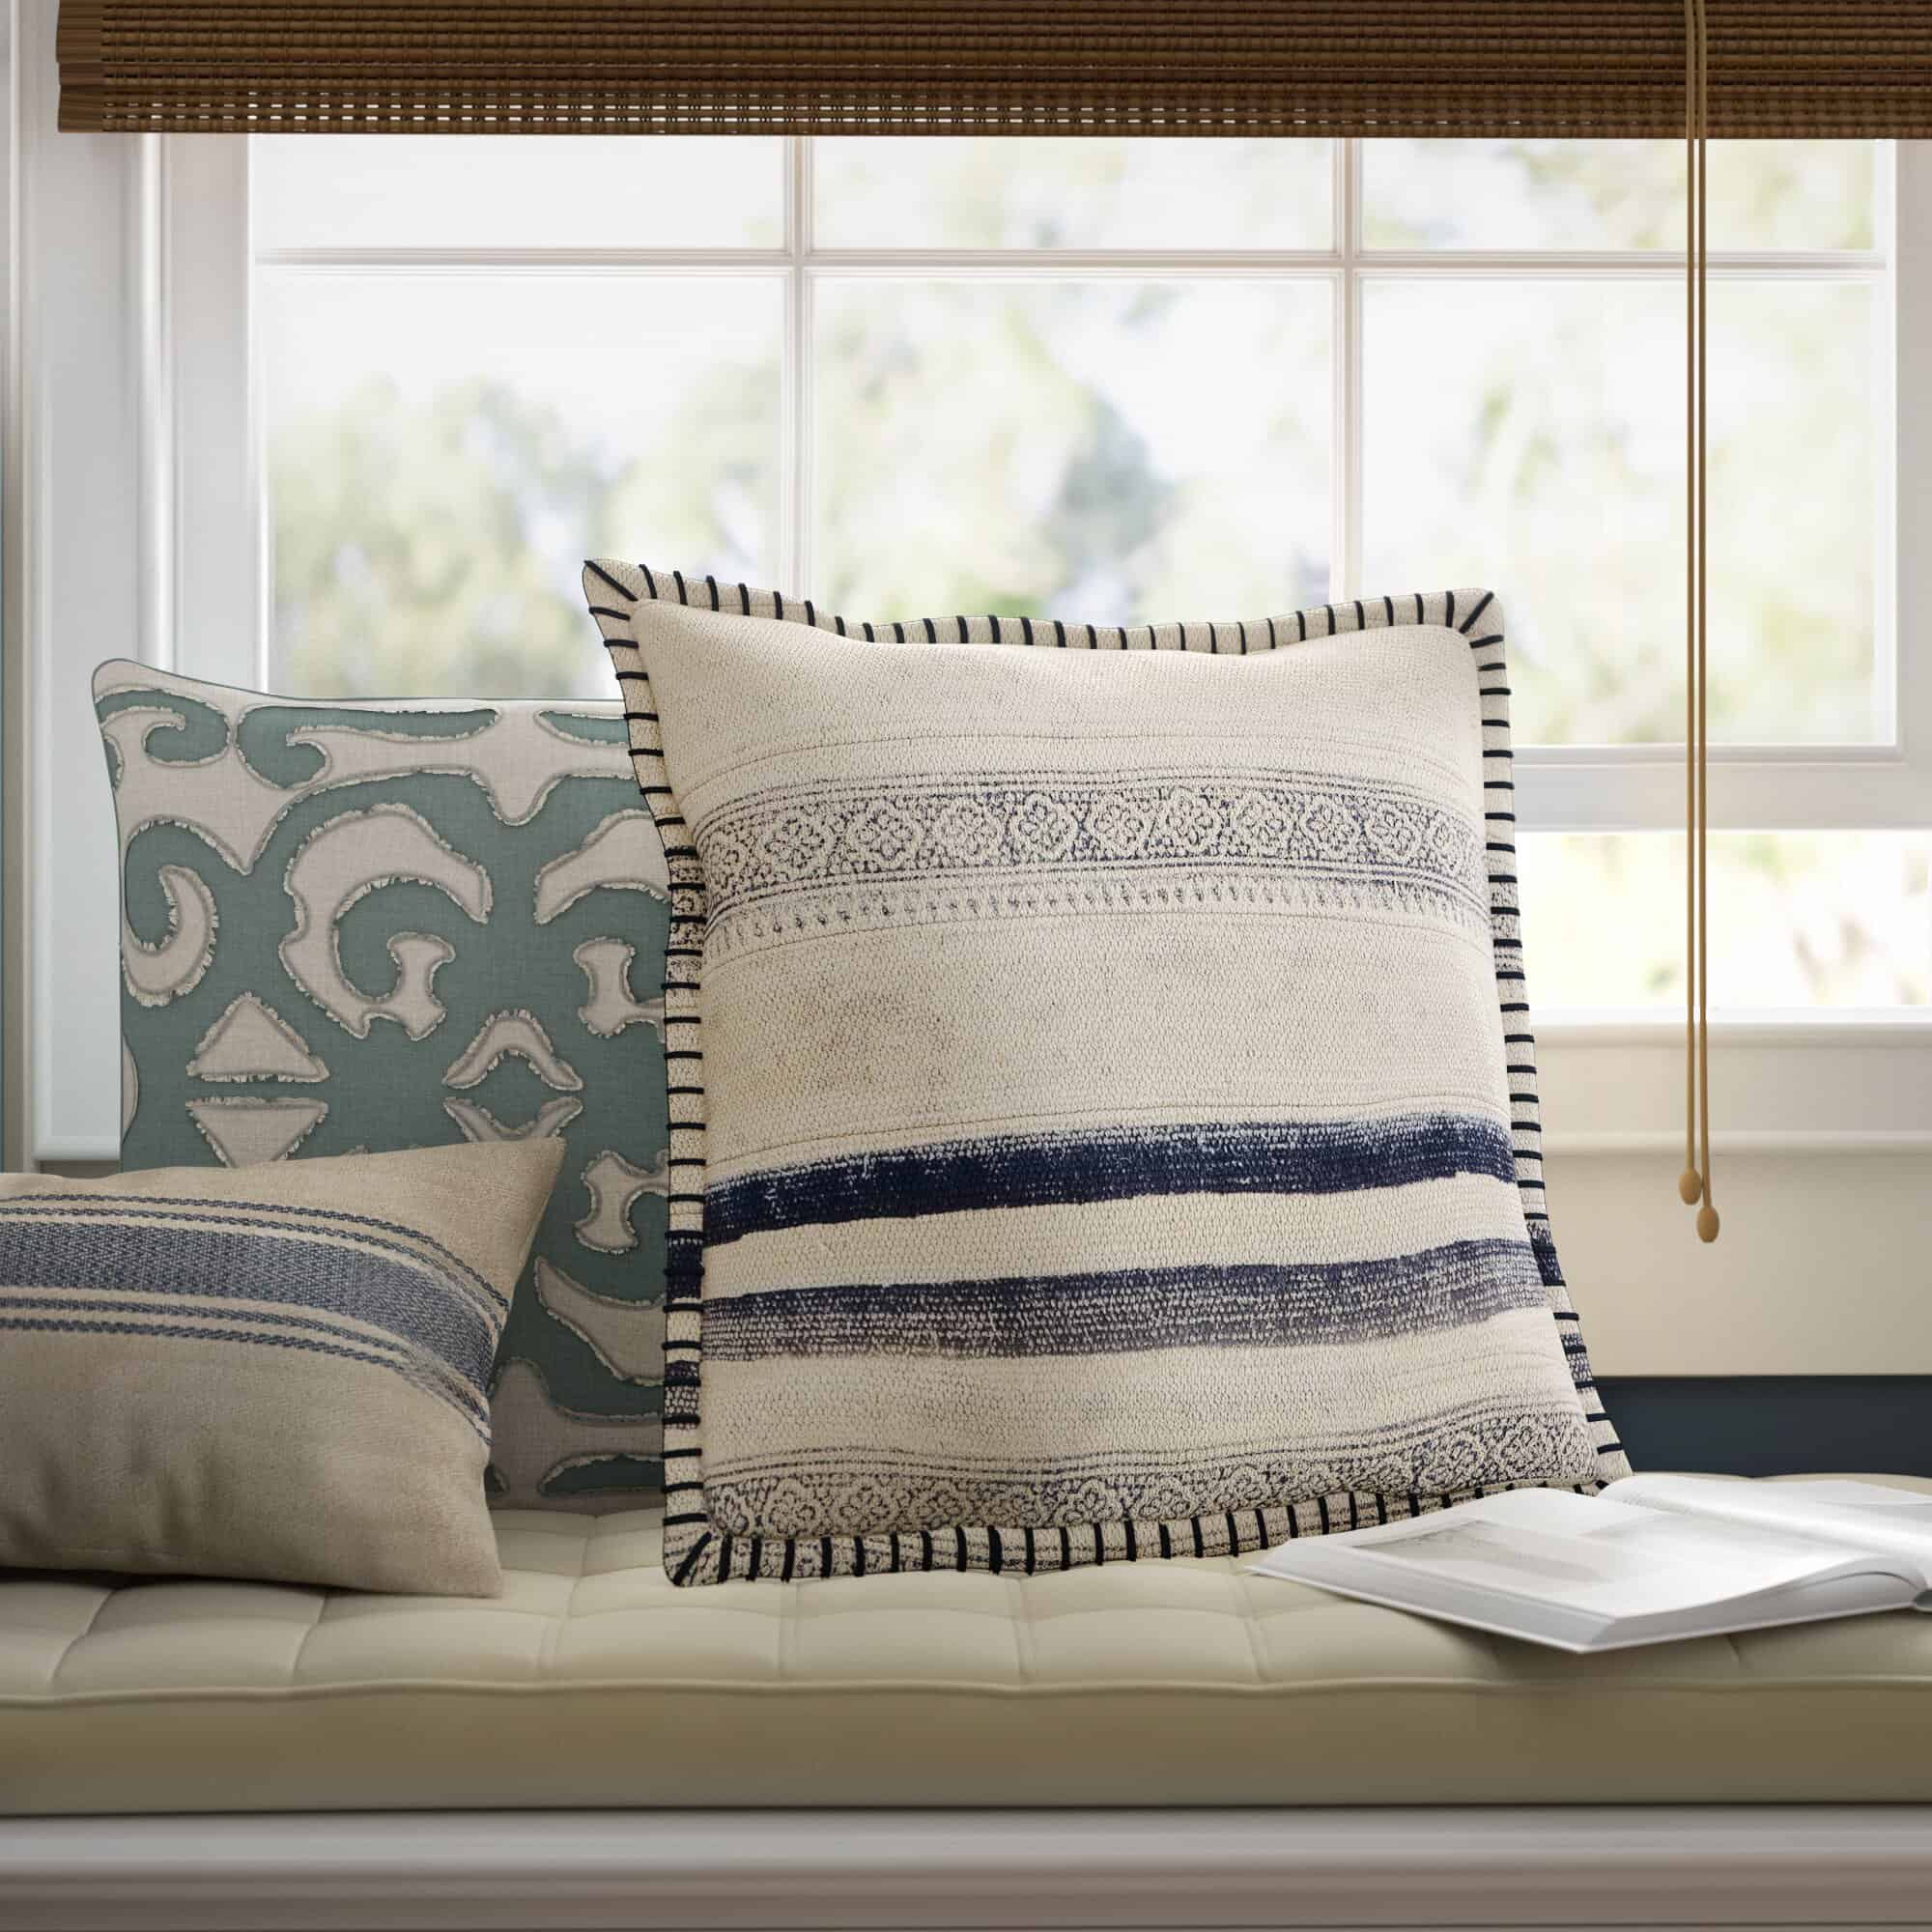 A Chic Decor Pillow Goes A Long Way